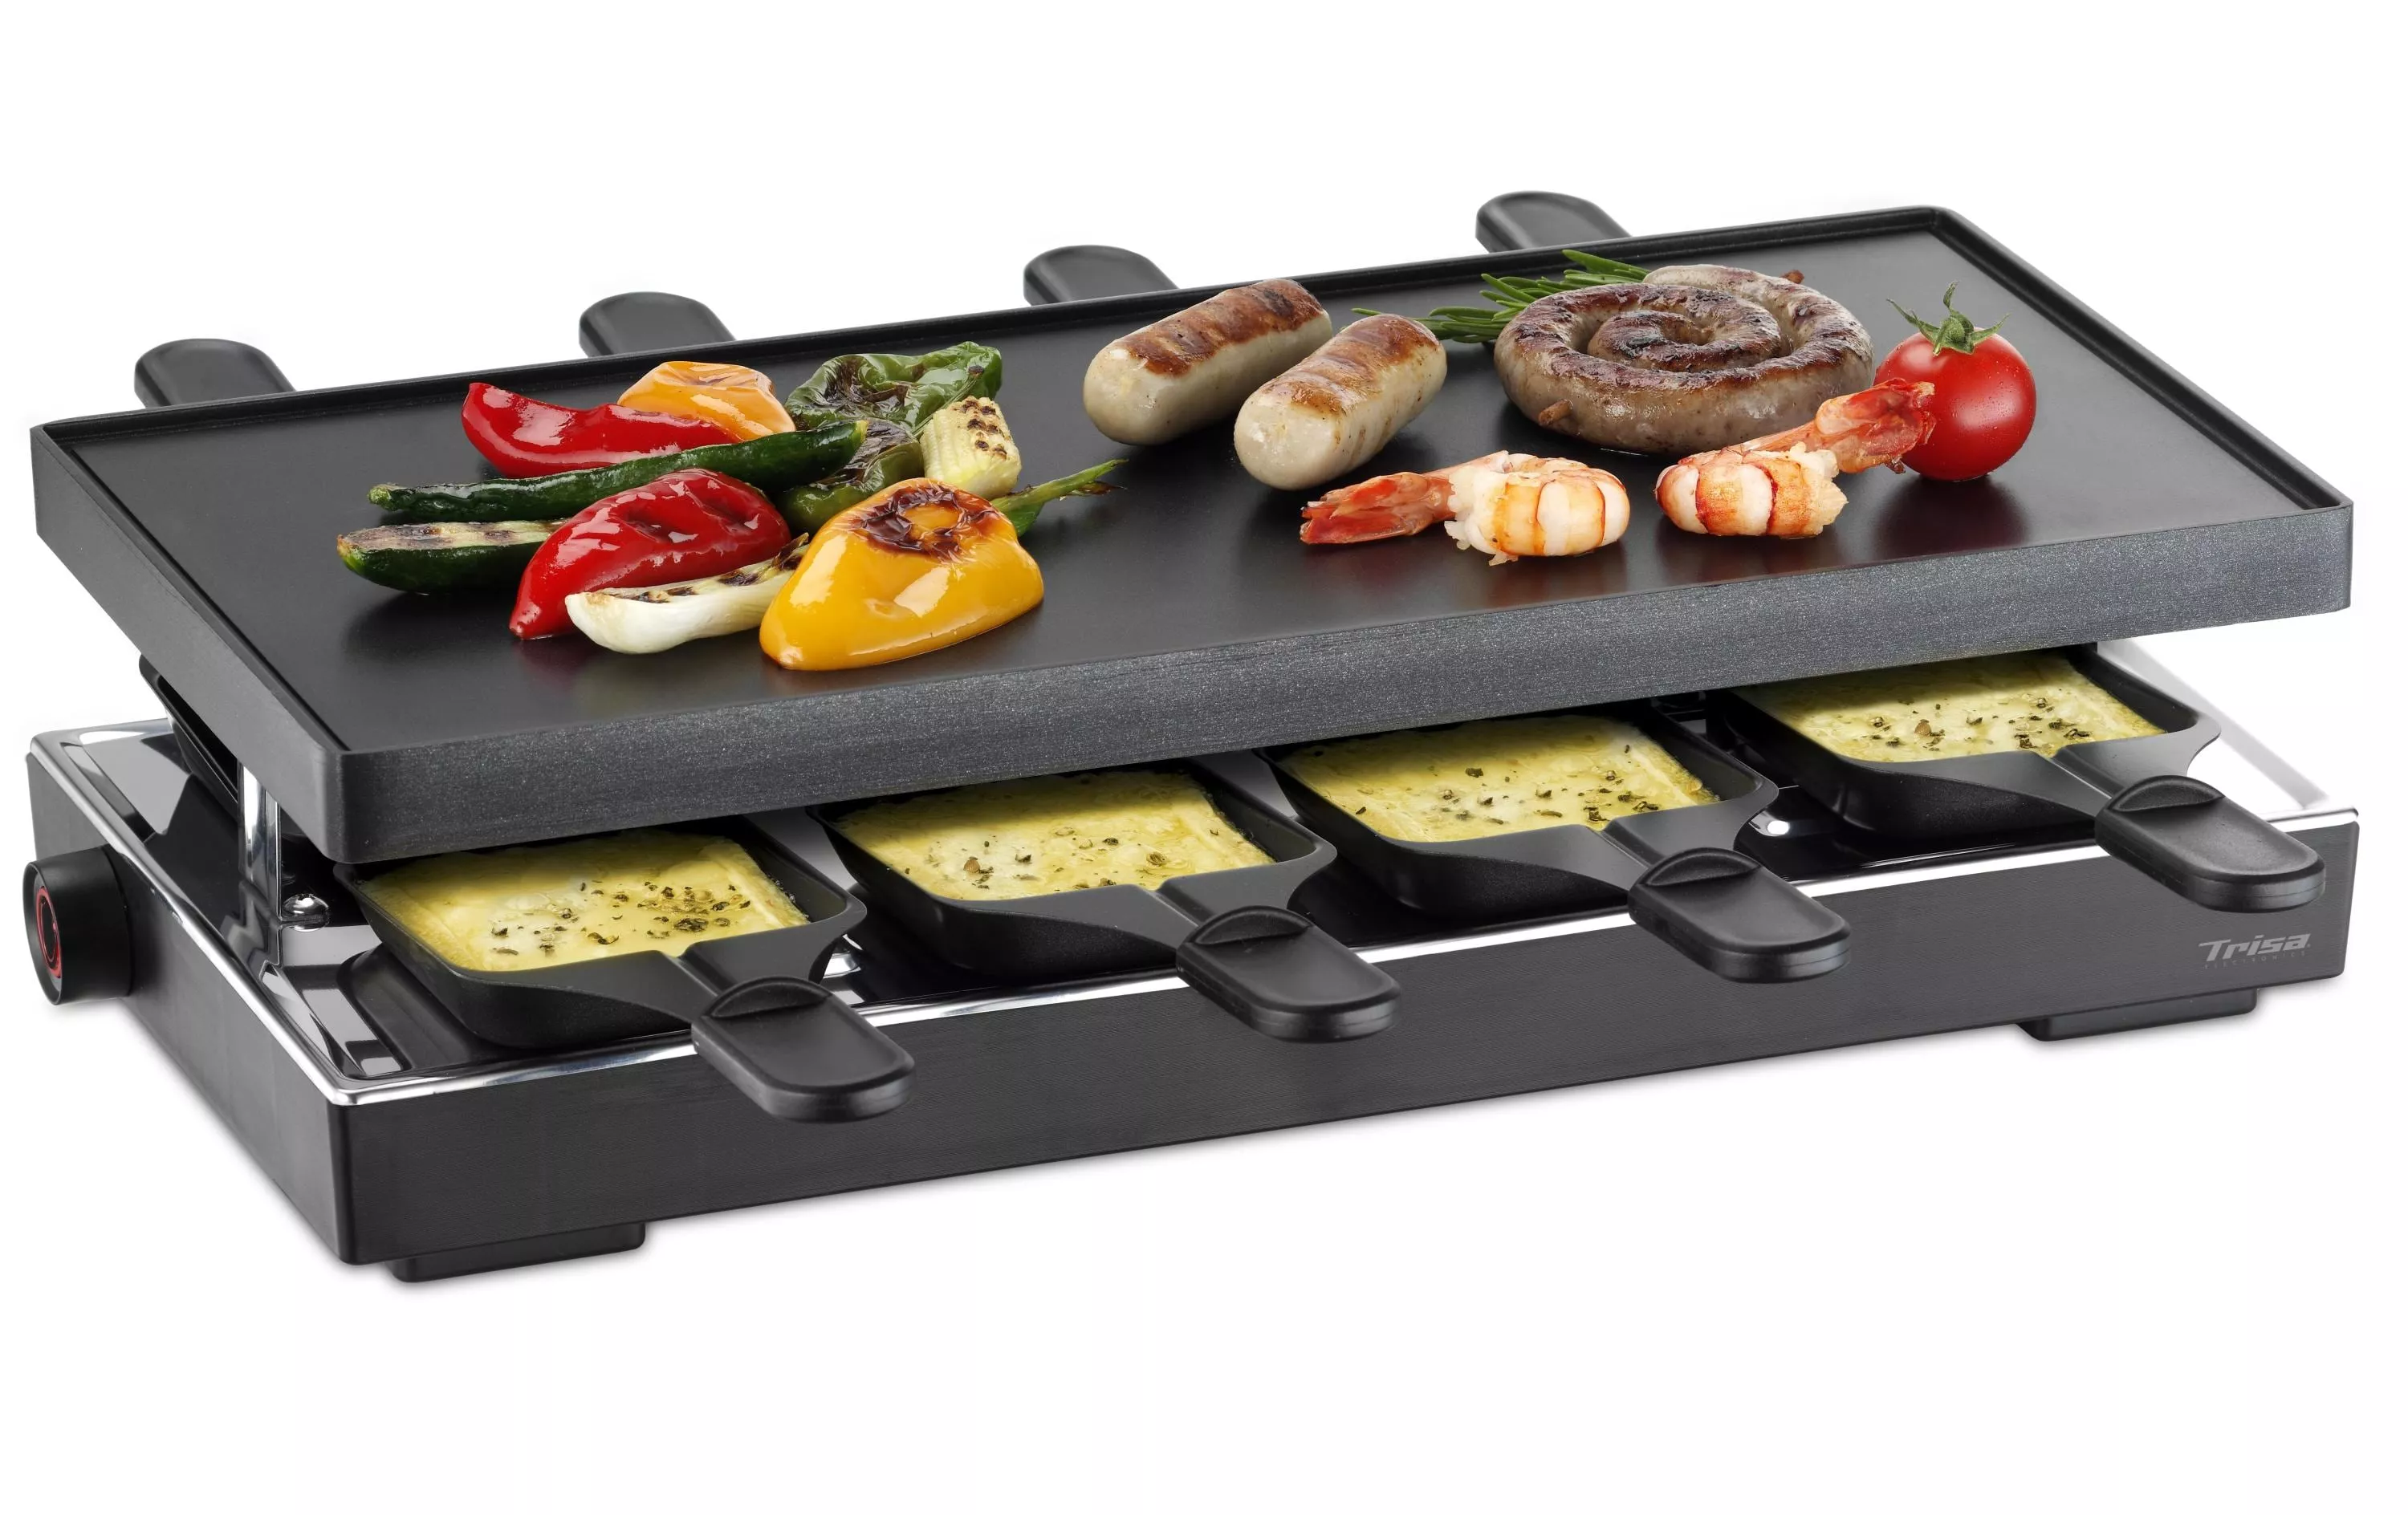 Raclette Oven Style 8 8 persone - Raclette